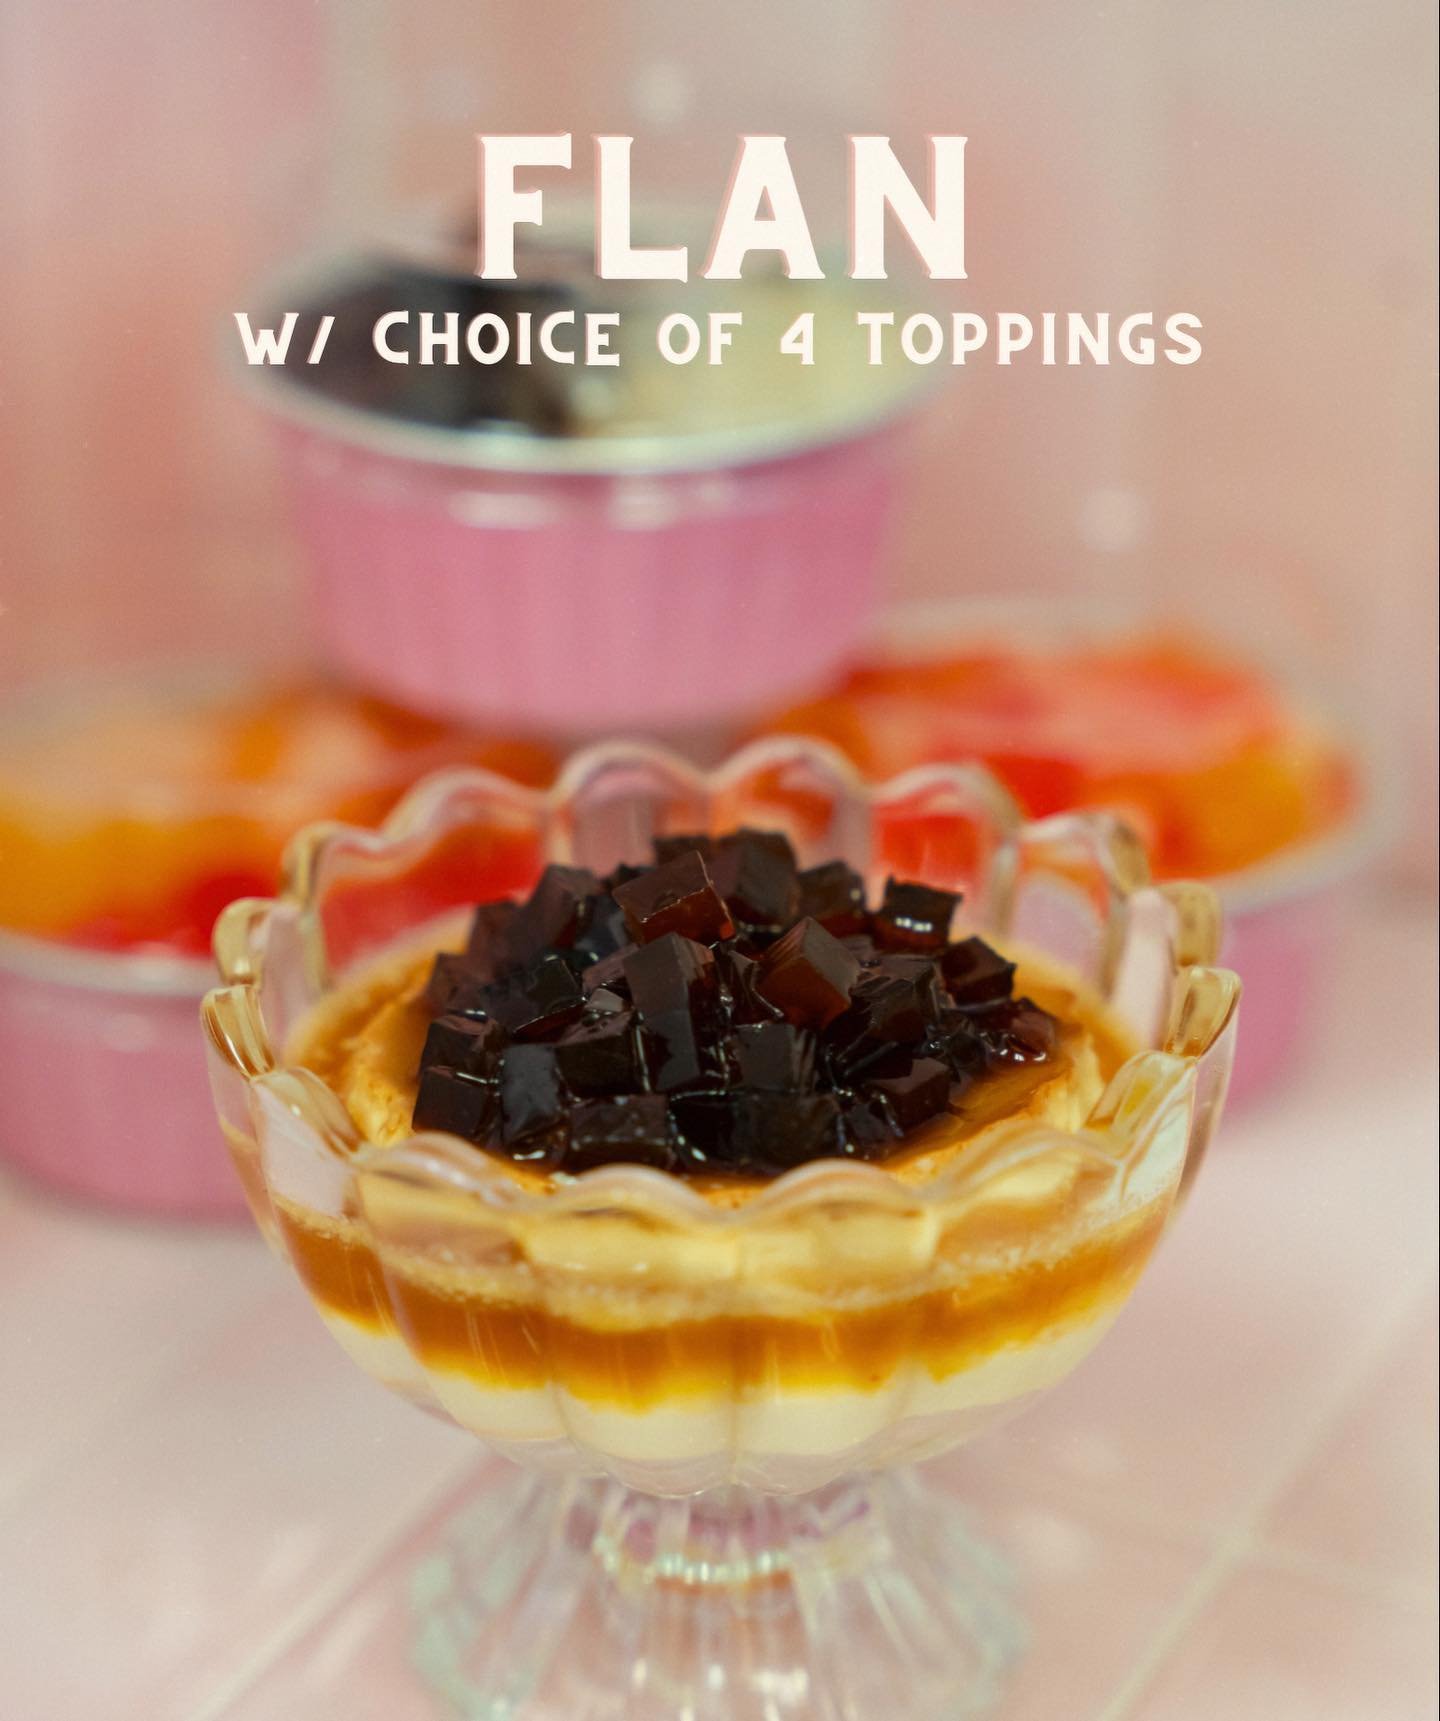 I crave our flan on the daily, it&rsquo;s just too good😩
&bull;&bull;&bull;
My fave toppings are either boba + coffee jelly or strawberry + mango jelly 🍮 What will you try it with?